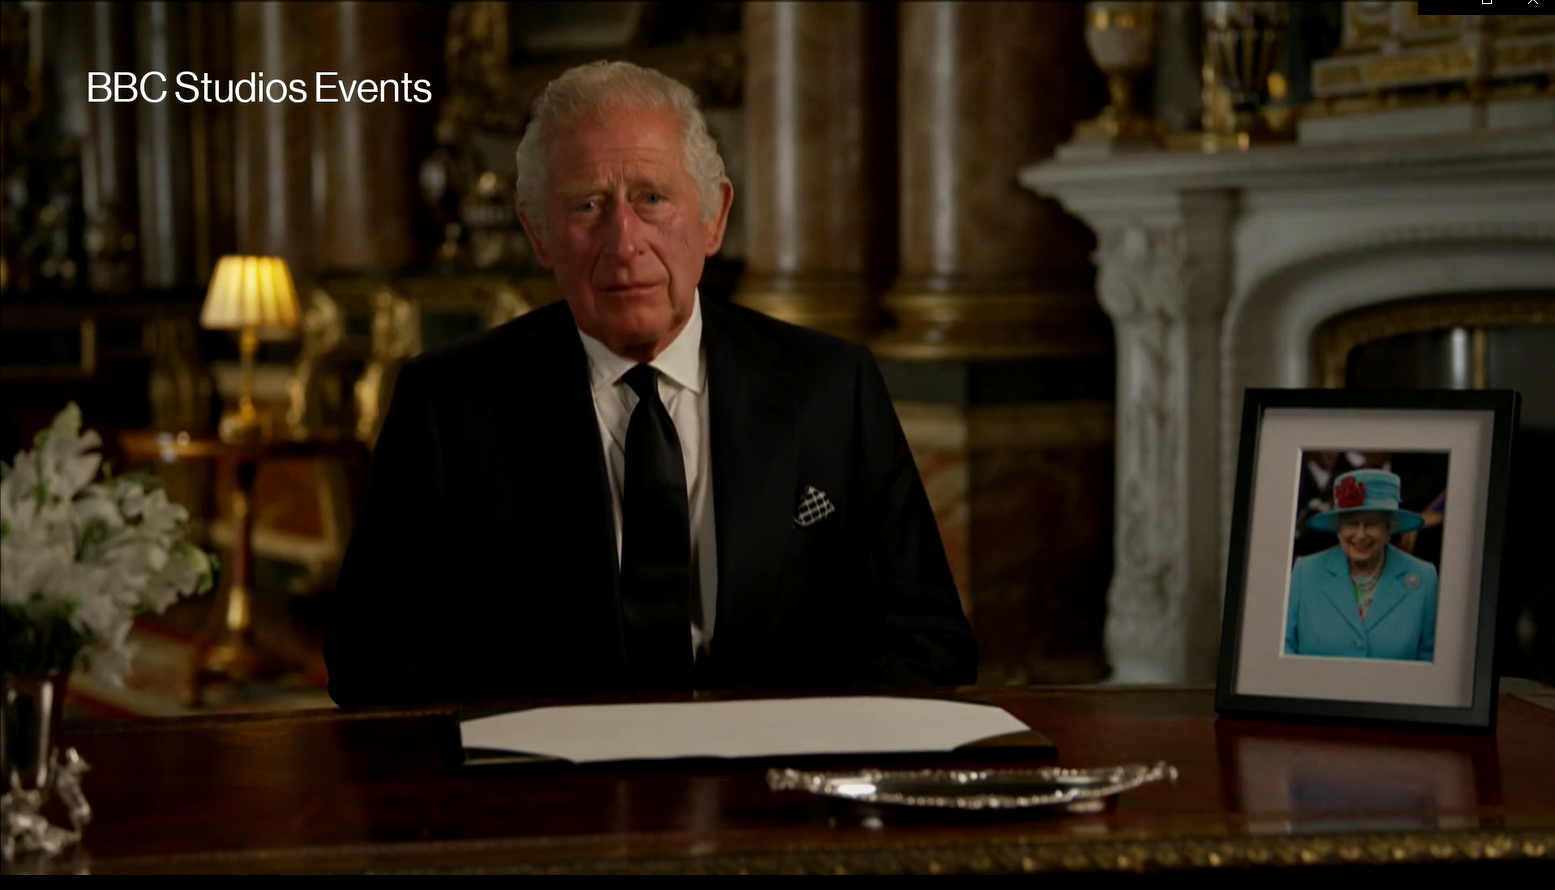 Video – Charles III addresses UK for first time as King